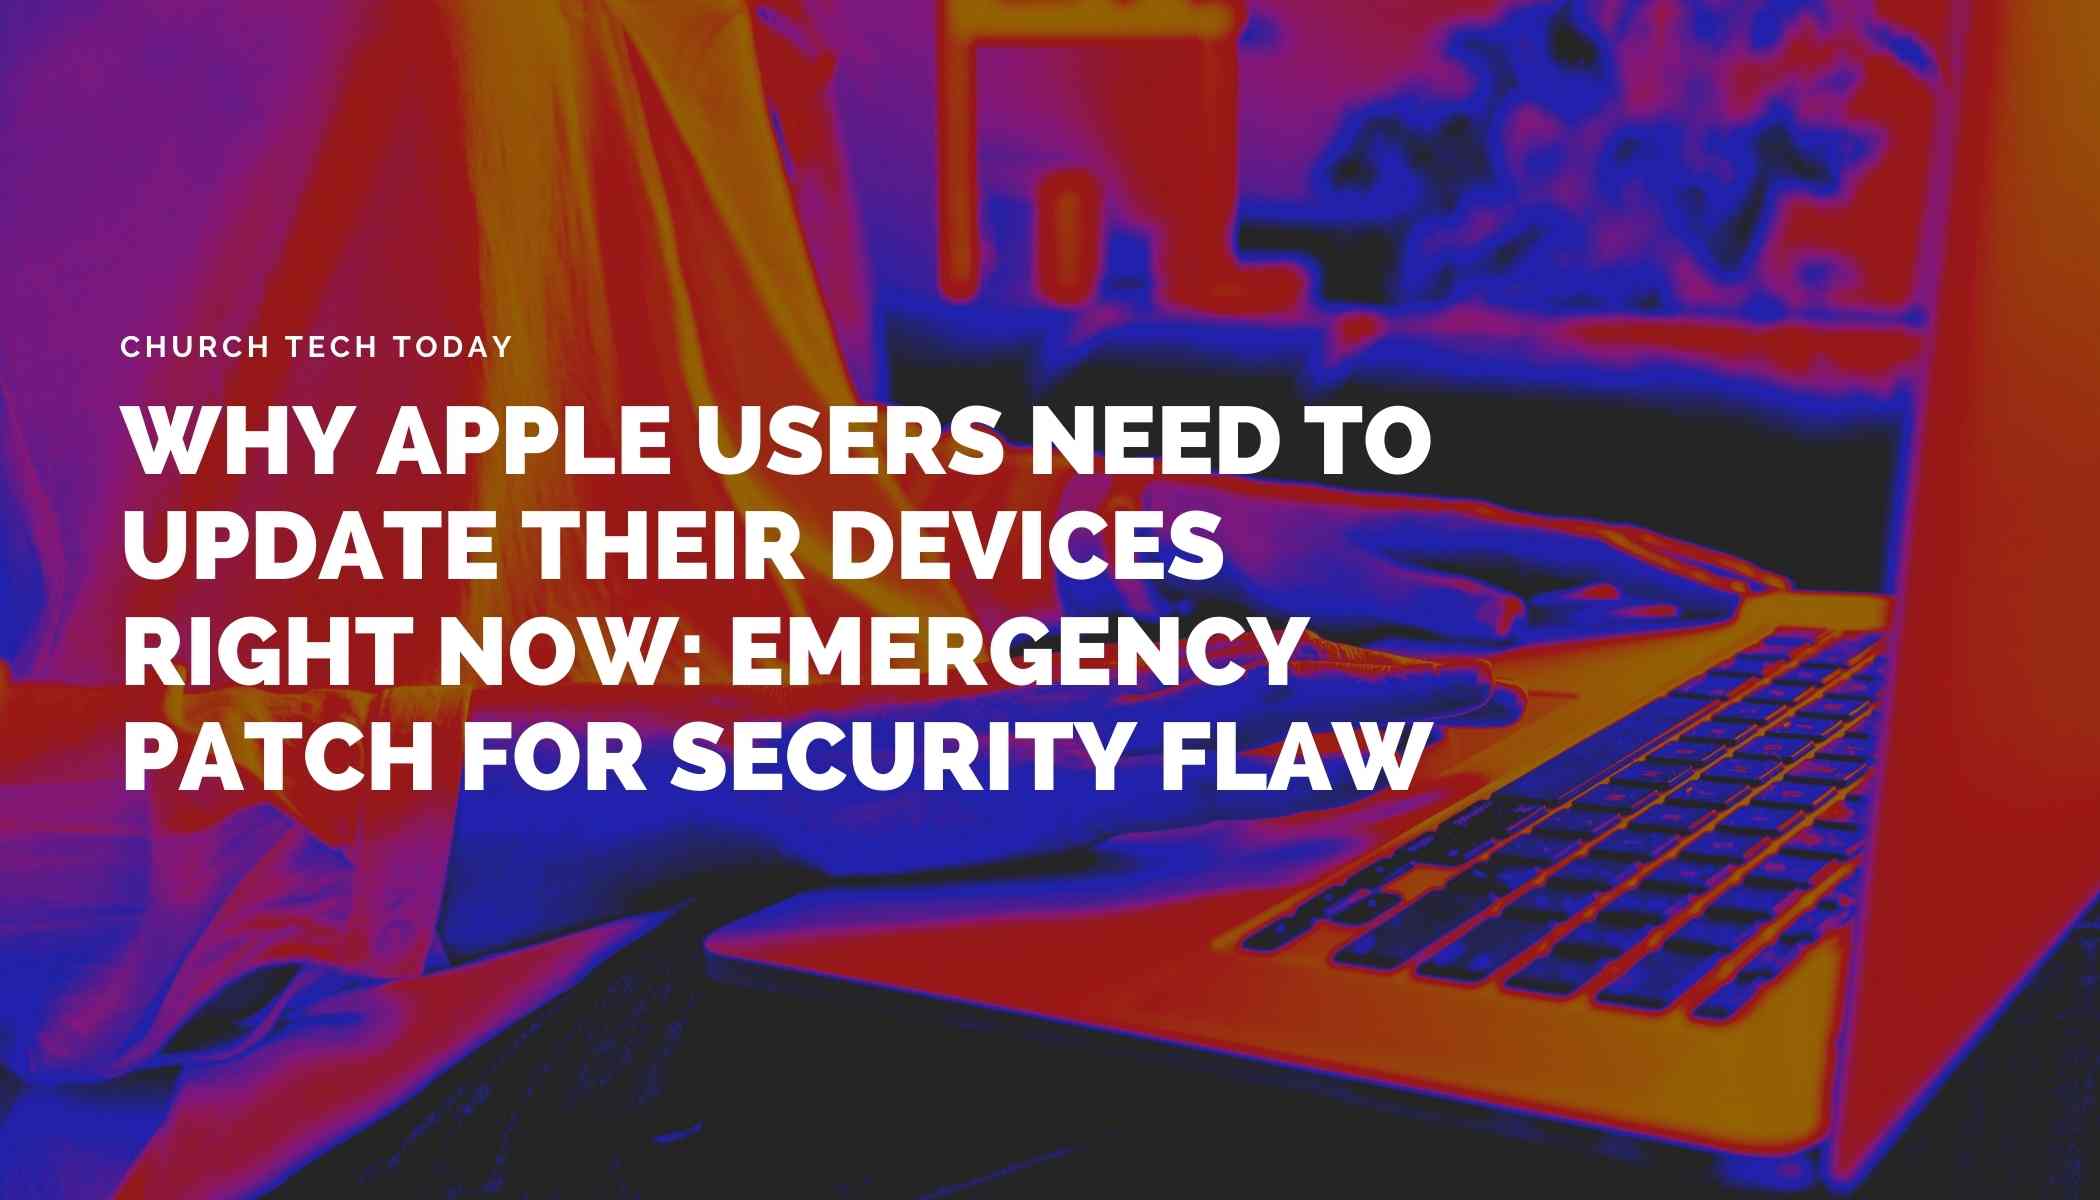 Apple emergency security flaw patch